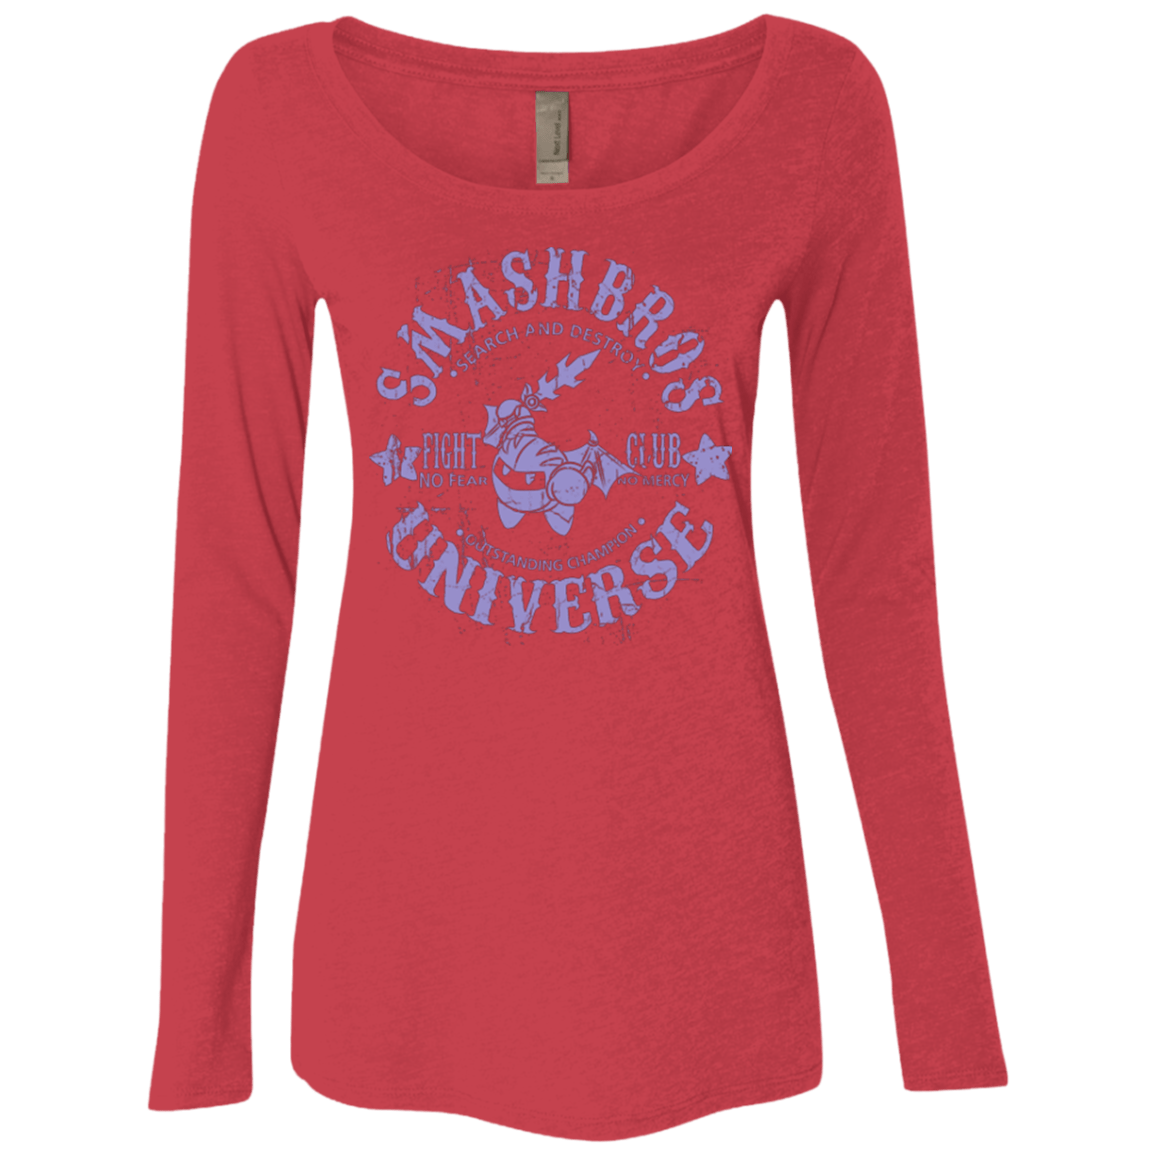 T-Shirts Vintage Red / Small STAR CHAMPION 2 Women's Triblend Long Sleeve Shirt